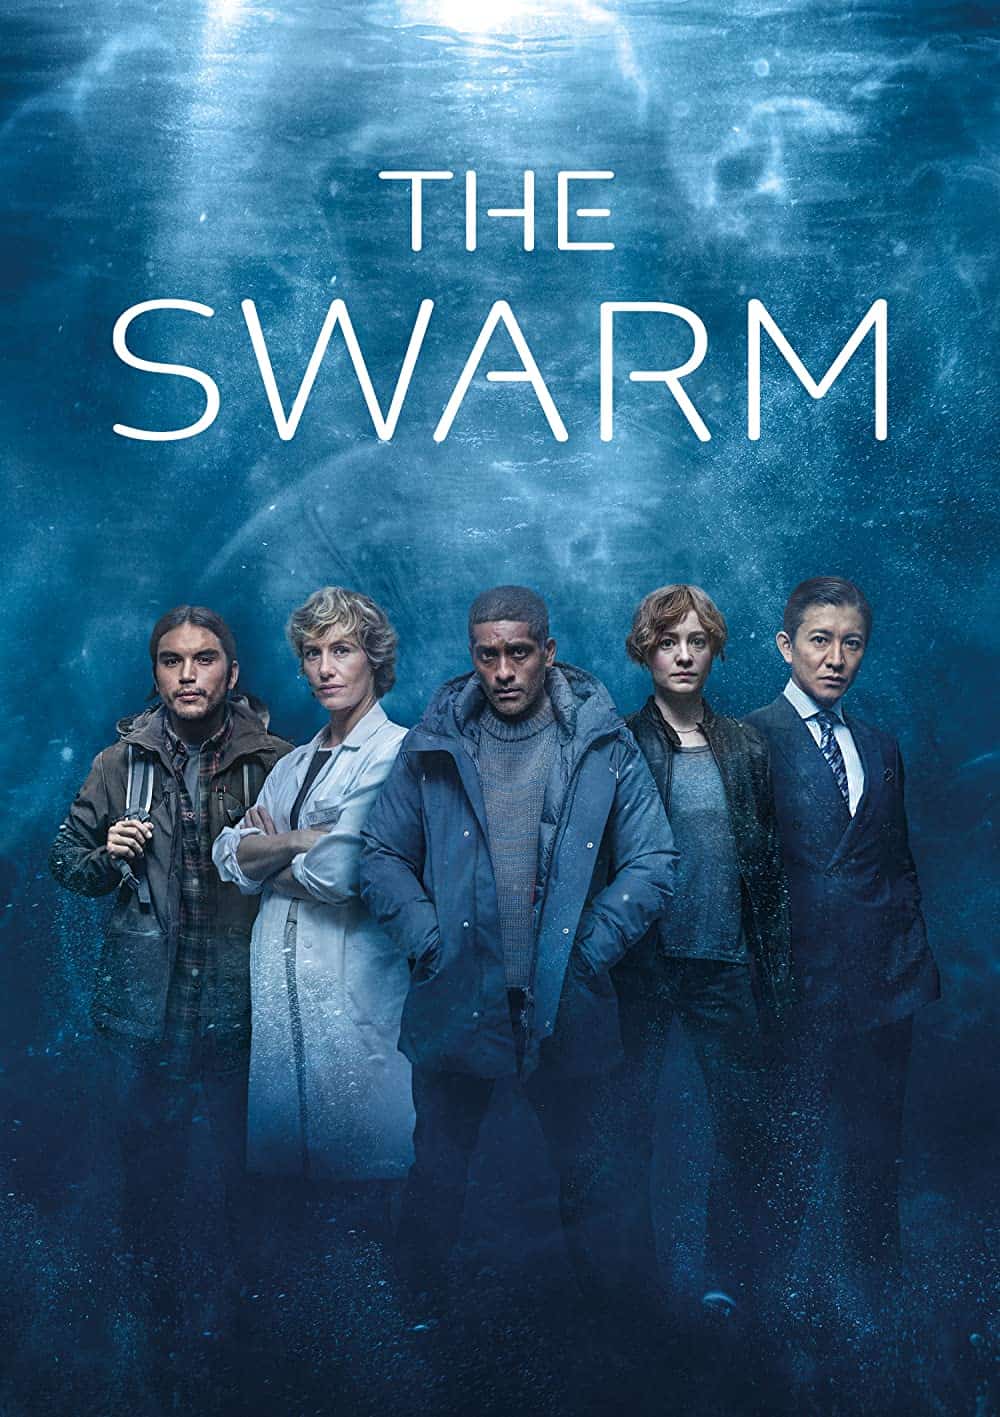 The Swarm TV series: The CW begins airing apocalyptic thriller in September